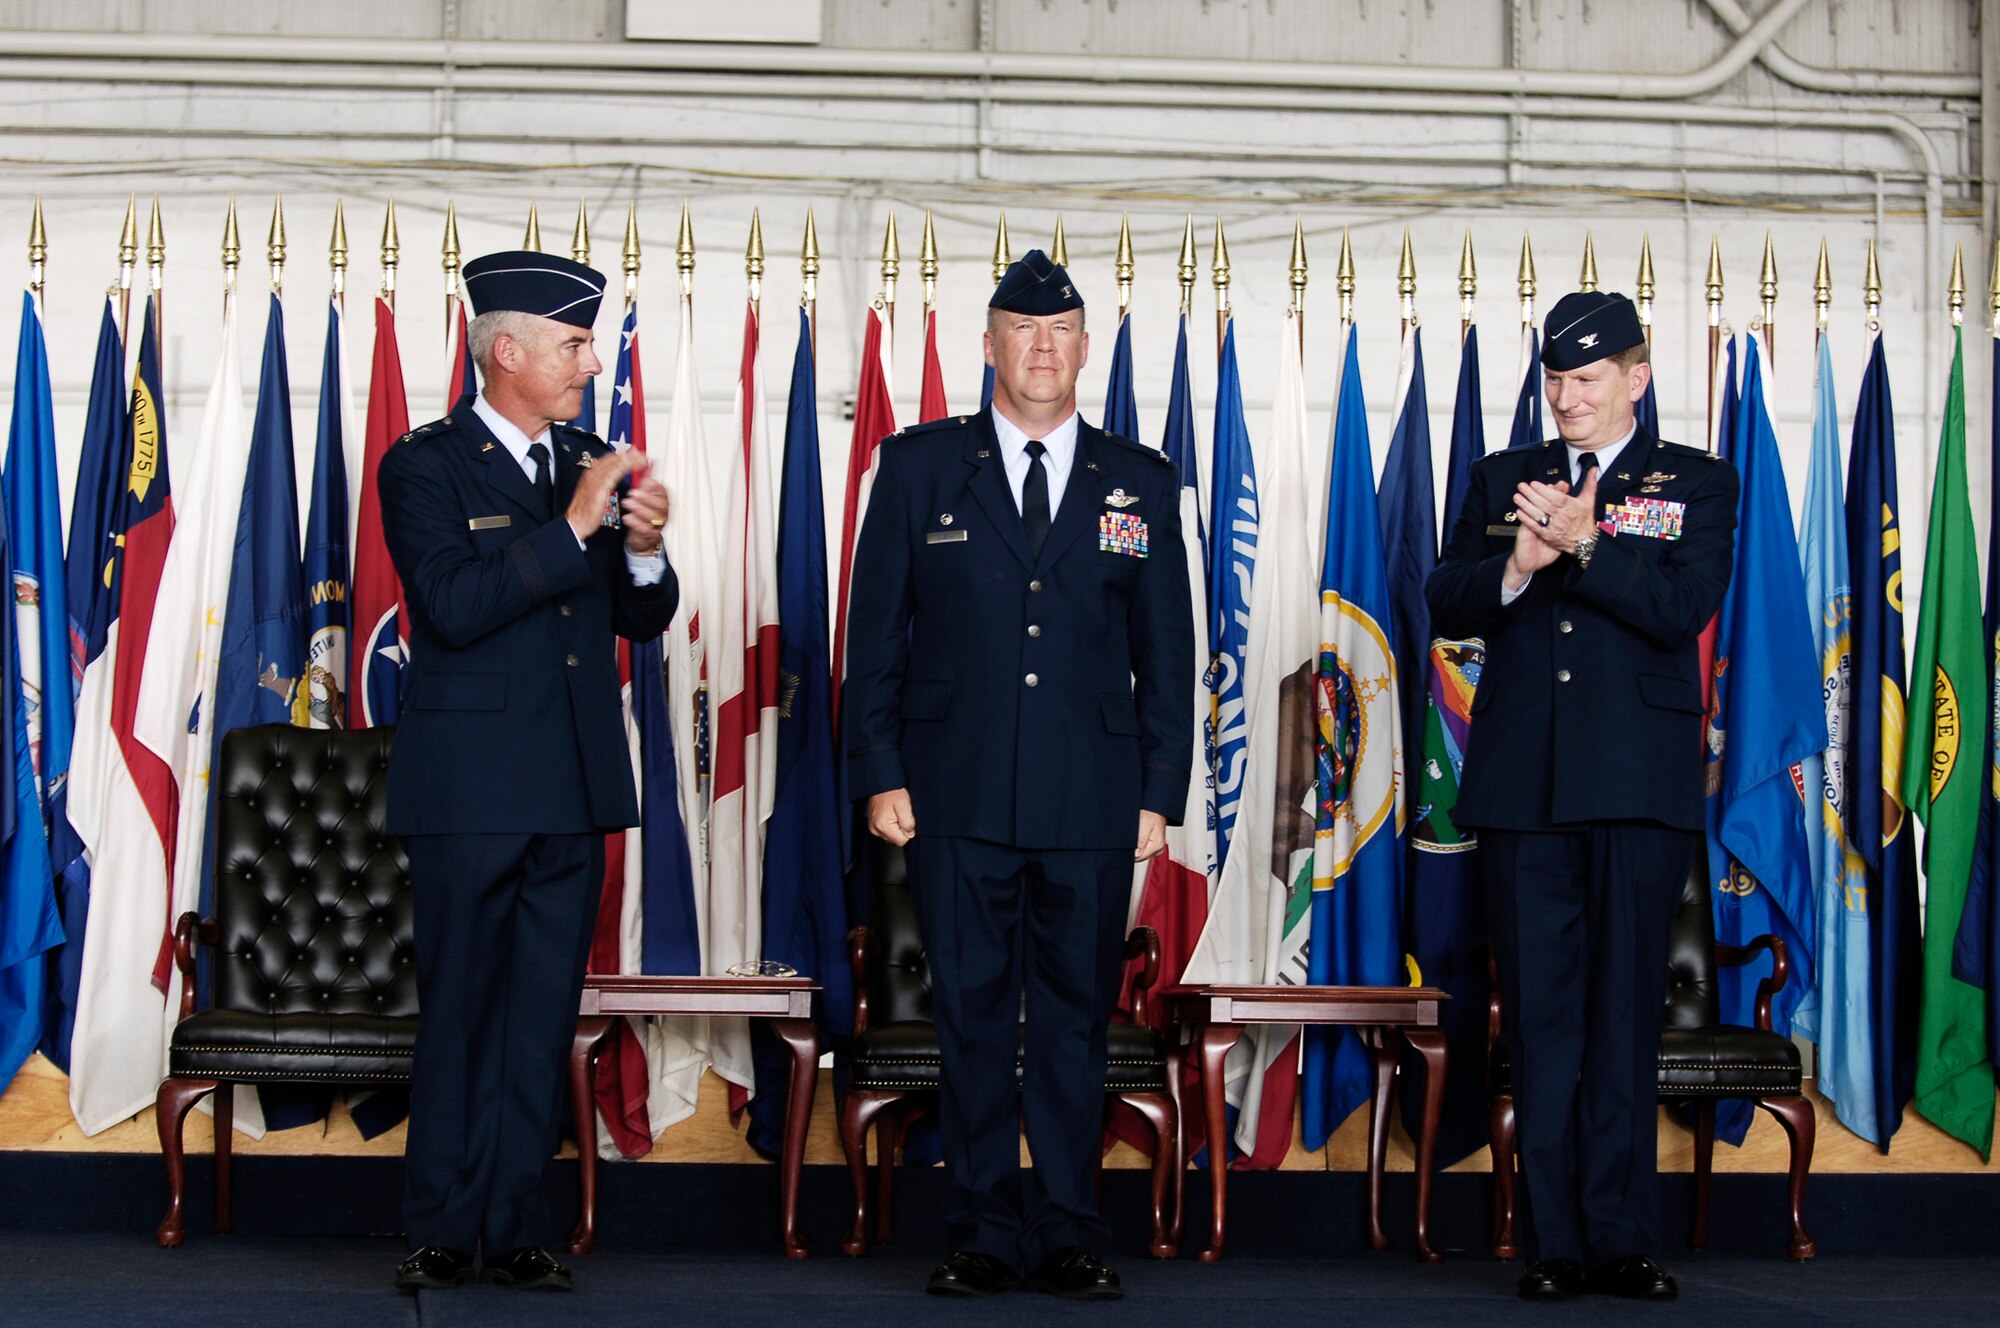 Maj. Gen. Winfield Scott III and Col. Robert Thomas applaud Col. Lawrence Martin after he accepts command of the 6th Air Mobility Wing Monday. Col. Thomas relinquished command of the wing during the ceremony  (U.S. Air Force photo/Tech. Sgt. Sean White)
